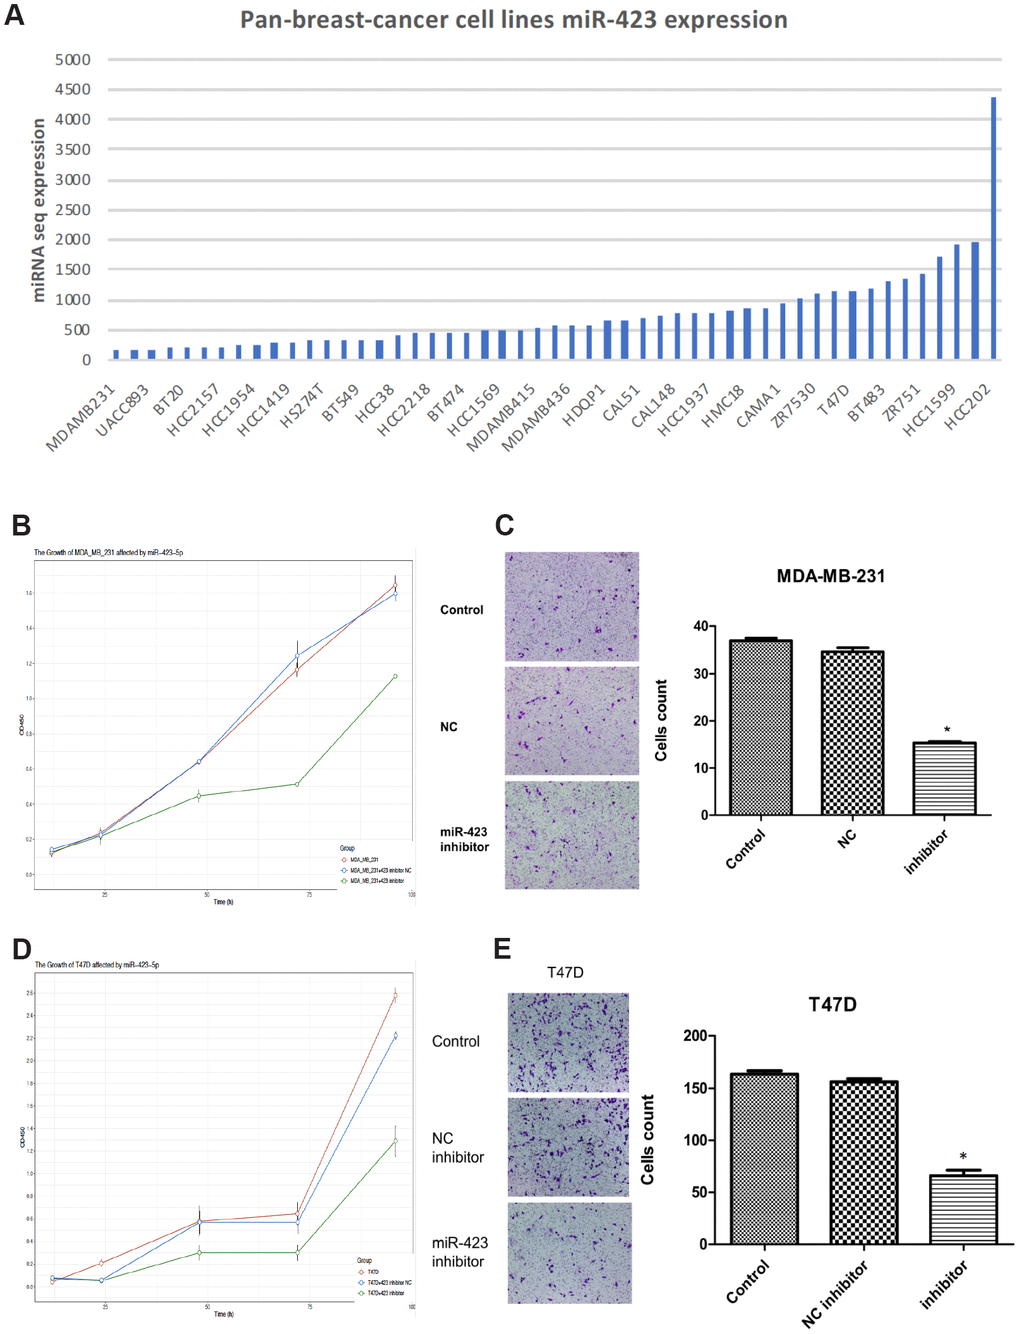 Inhibition of hsa-miR-423-5p impairs proliferation and invasion of breast cancer cells. (A) In board breast cancer cell lines, hsa-miR-423-5p expression was performed for the selection of cell model prior to in vitro studies. (B, D) Both MDA-MB-231 and T47D cells were treated with siRNA inhibitor or siNC for 96h, and cell proliferation was measured by CCK-8 assays. (C, E) For migration analysis, Transwell cell assay was performed in both MDA-MB-231 and T47D cells, and invasive cells were stained with crystal violet and counted under a microscope. *P 